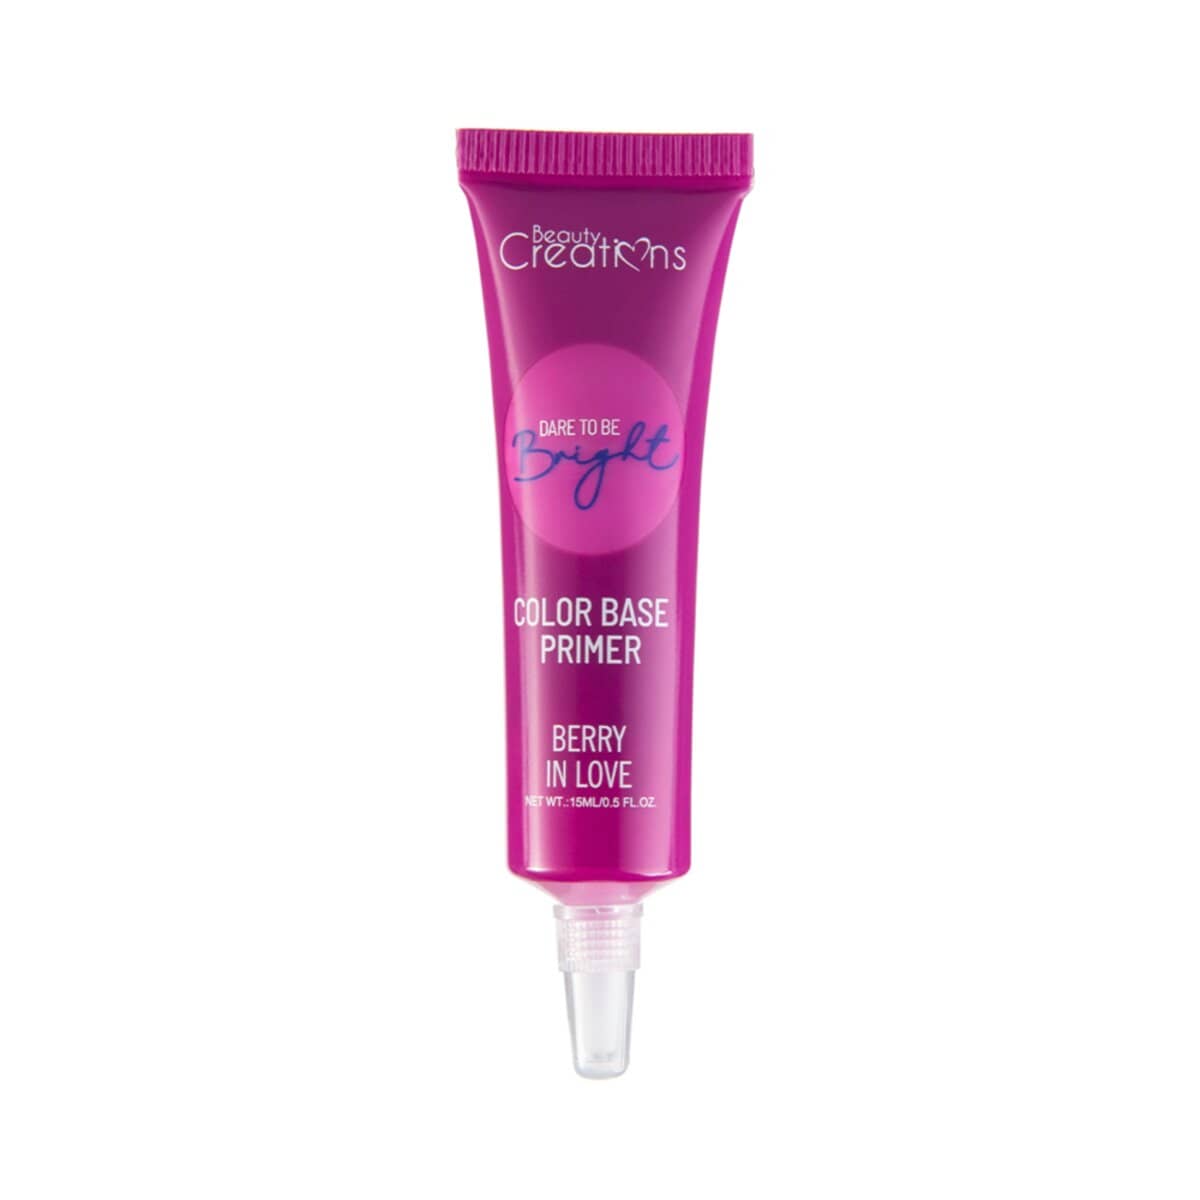 DARE TO BE BRIGHT EYE BASE COLOR PRIMER BERRY IN LOVE - BEAUTY CREATIONS